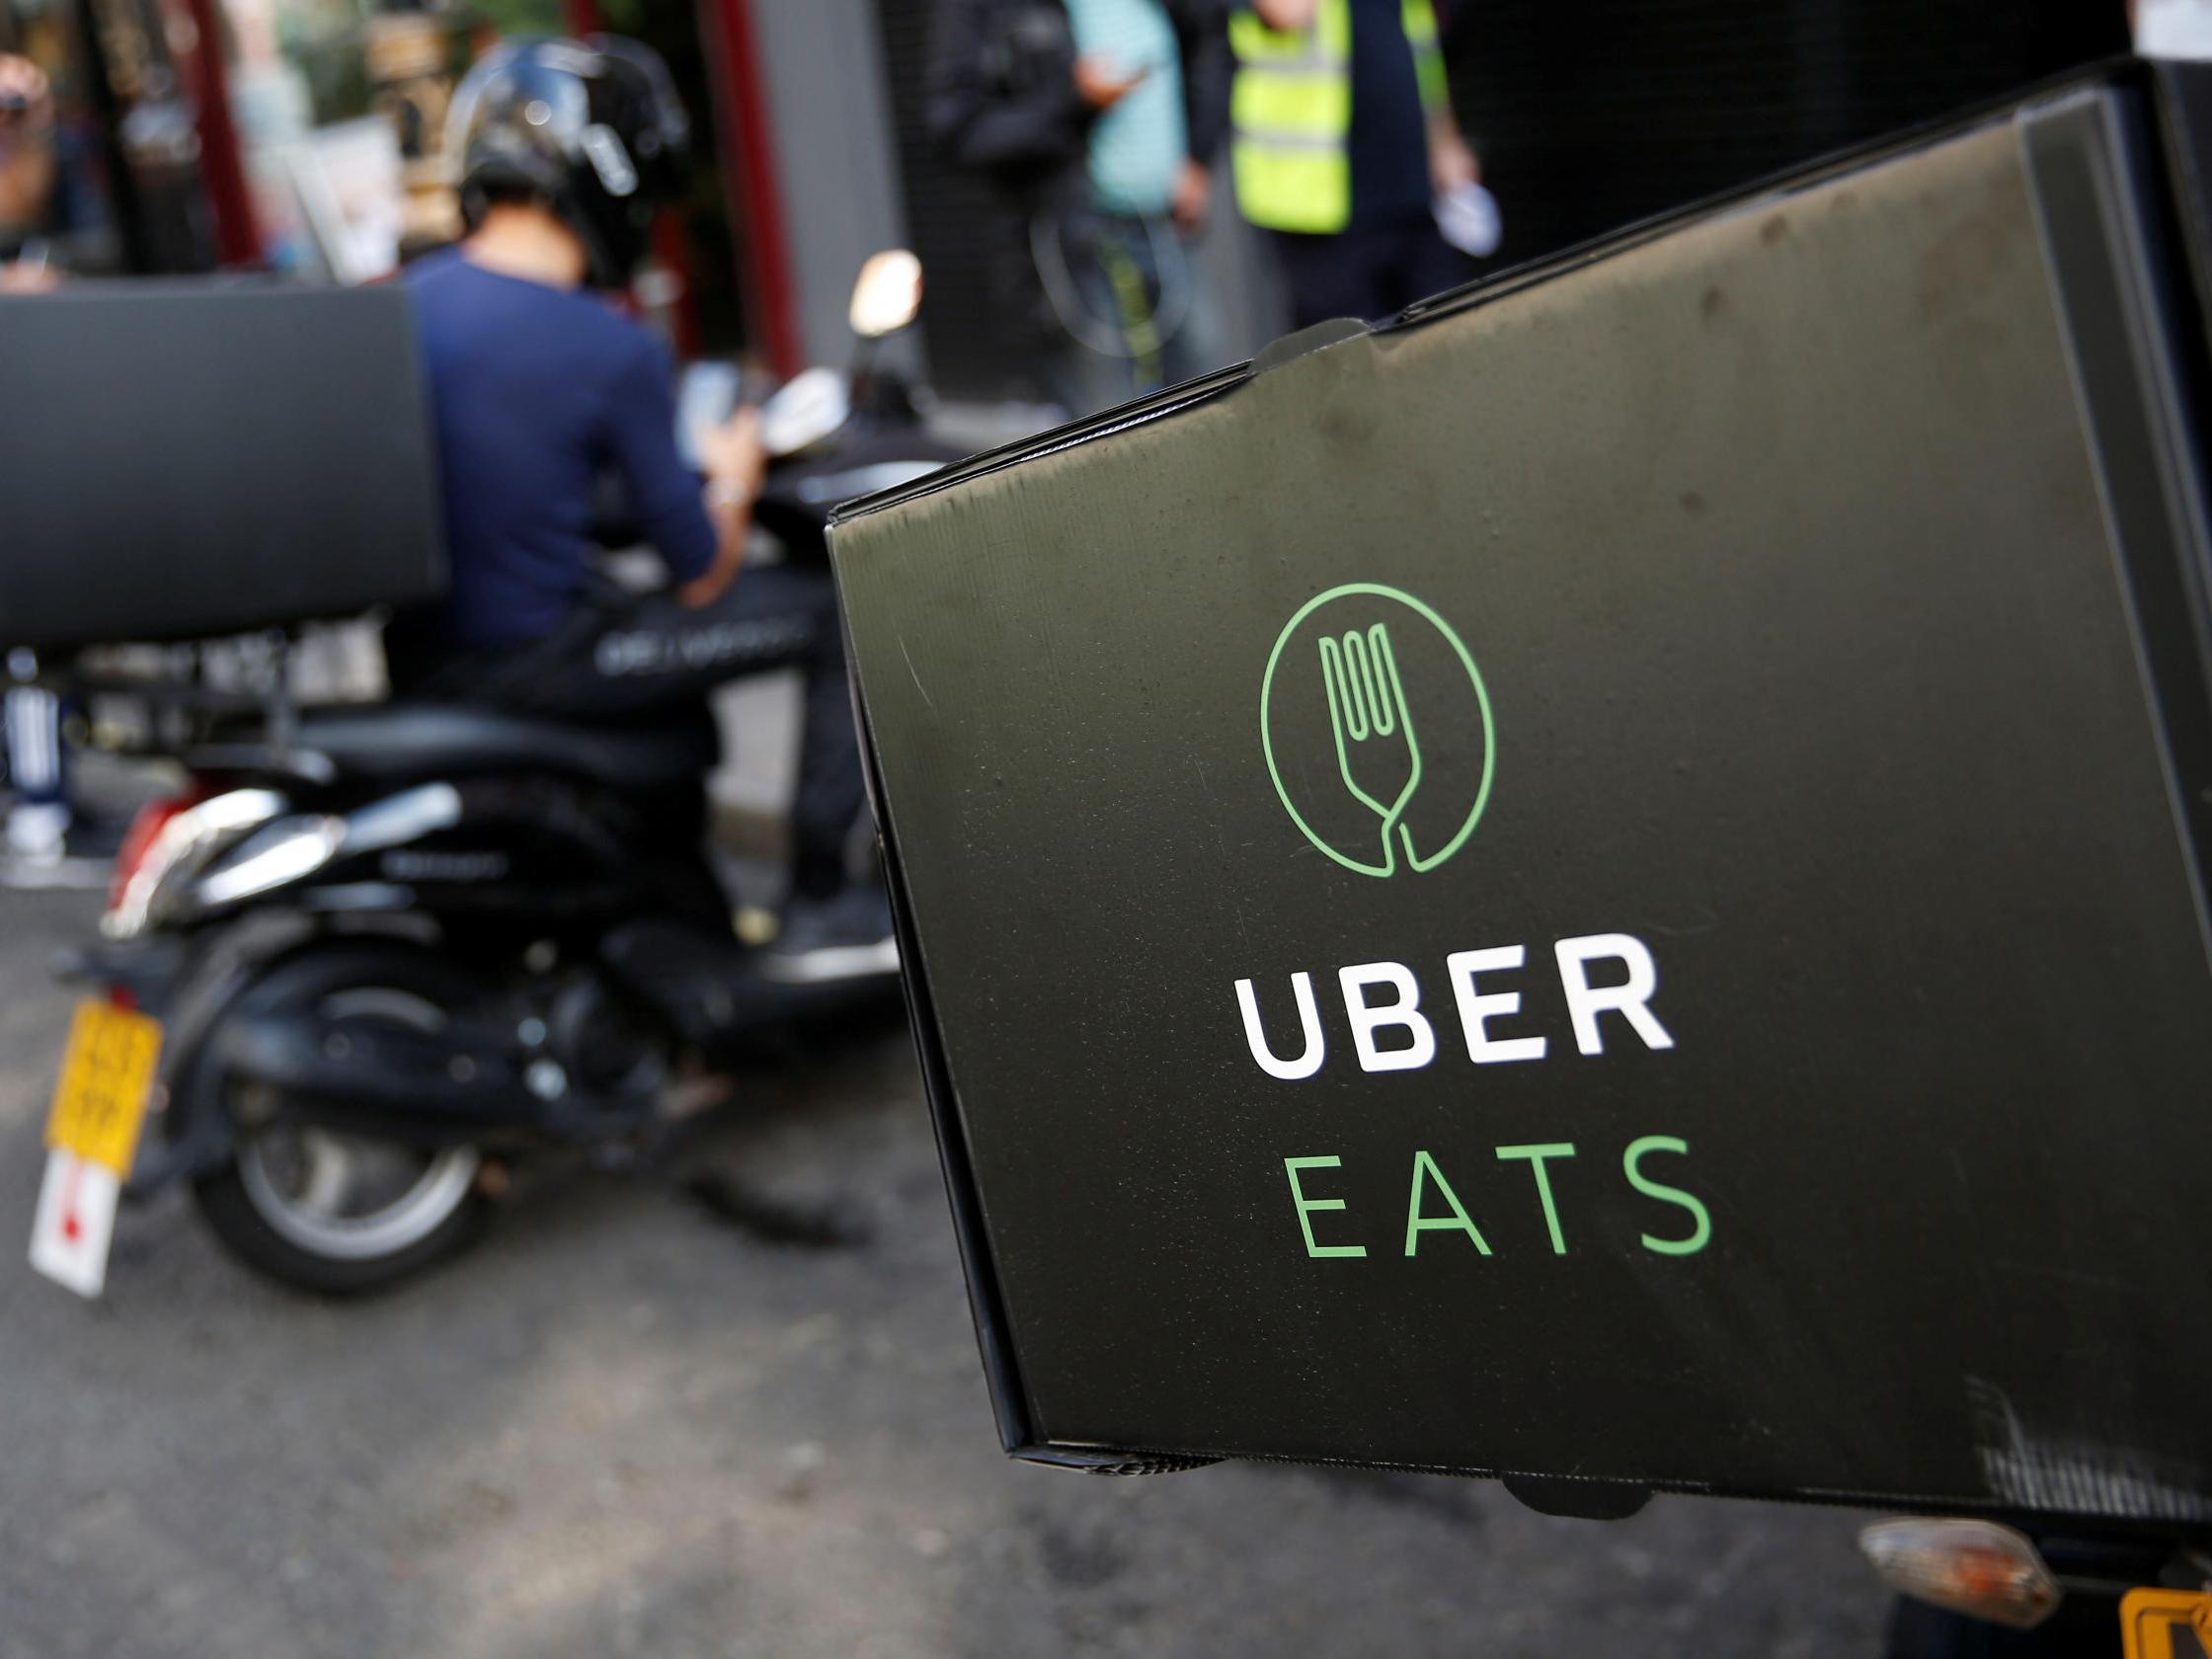 Uber has invested heavily in it’s own food-delivery app, Uber Eats